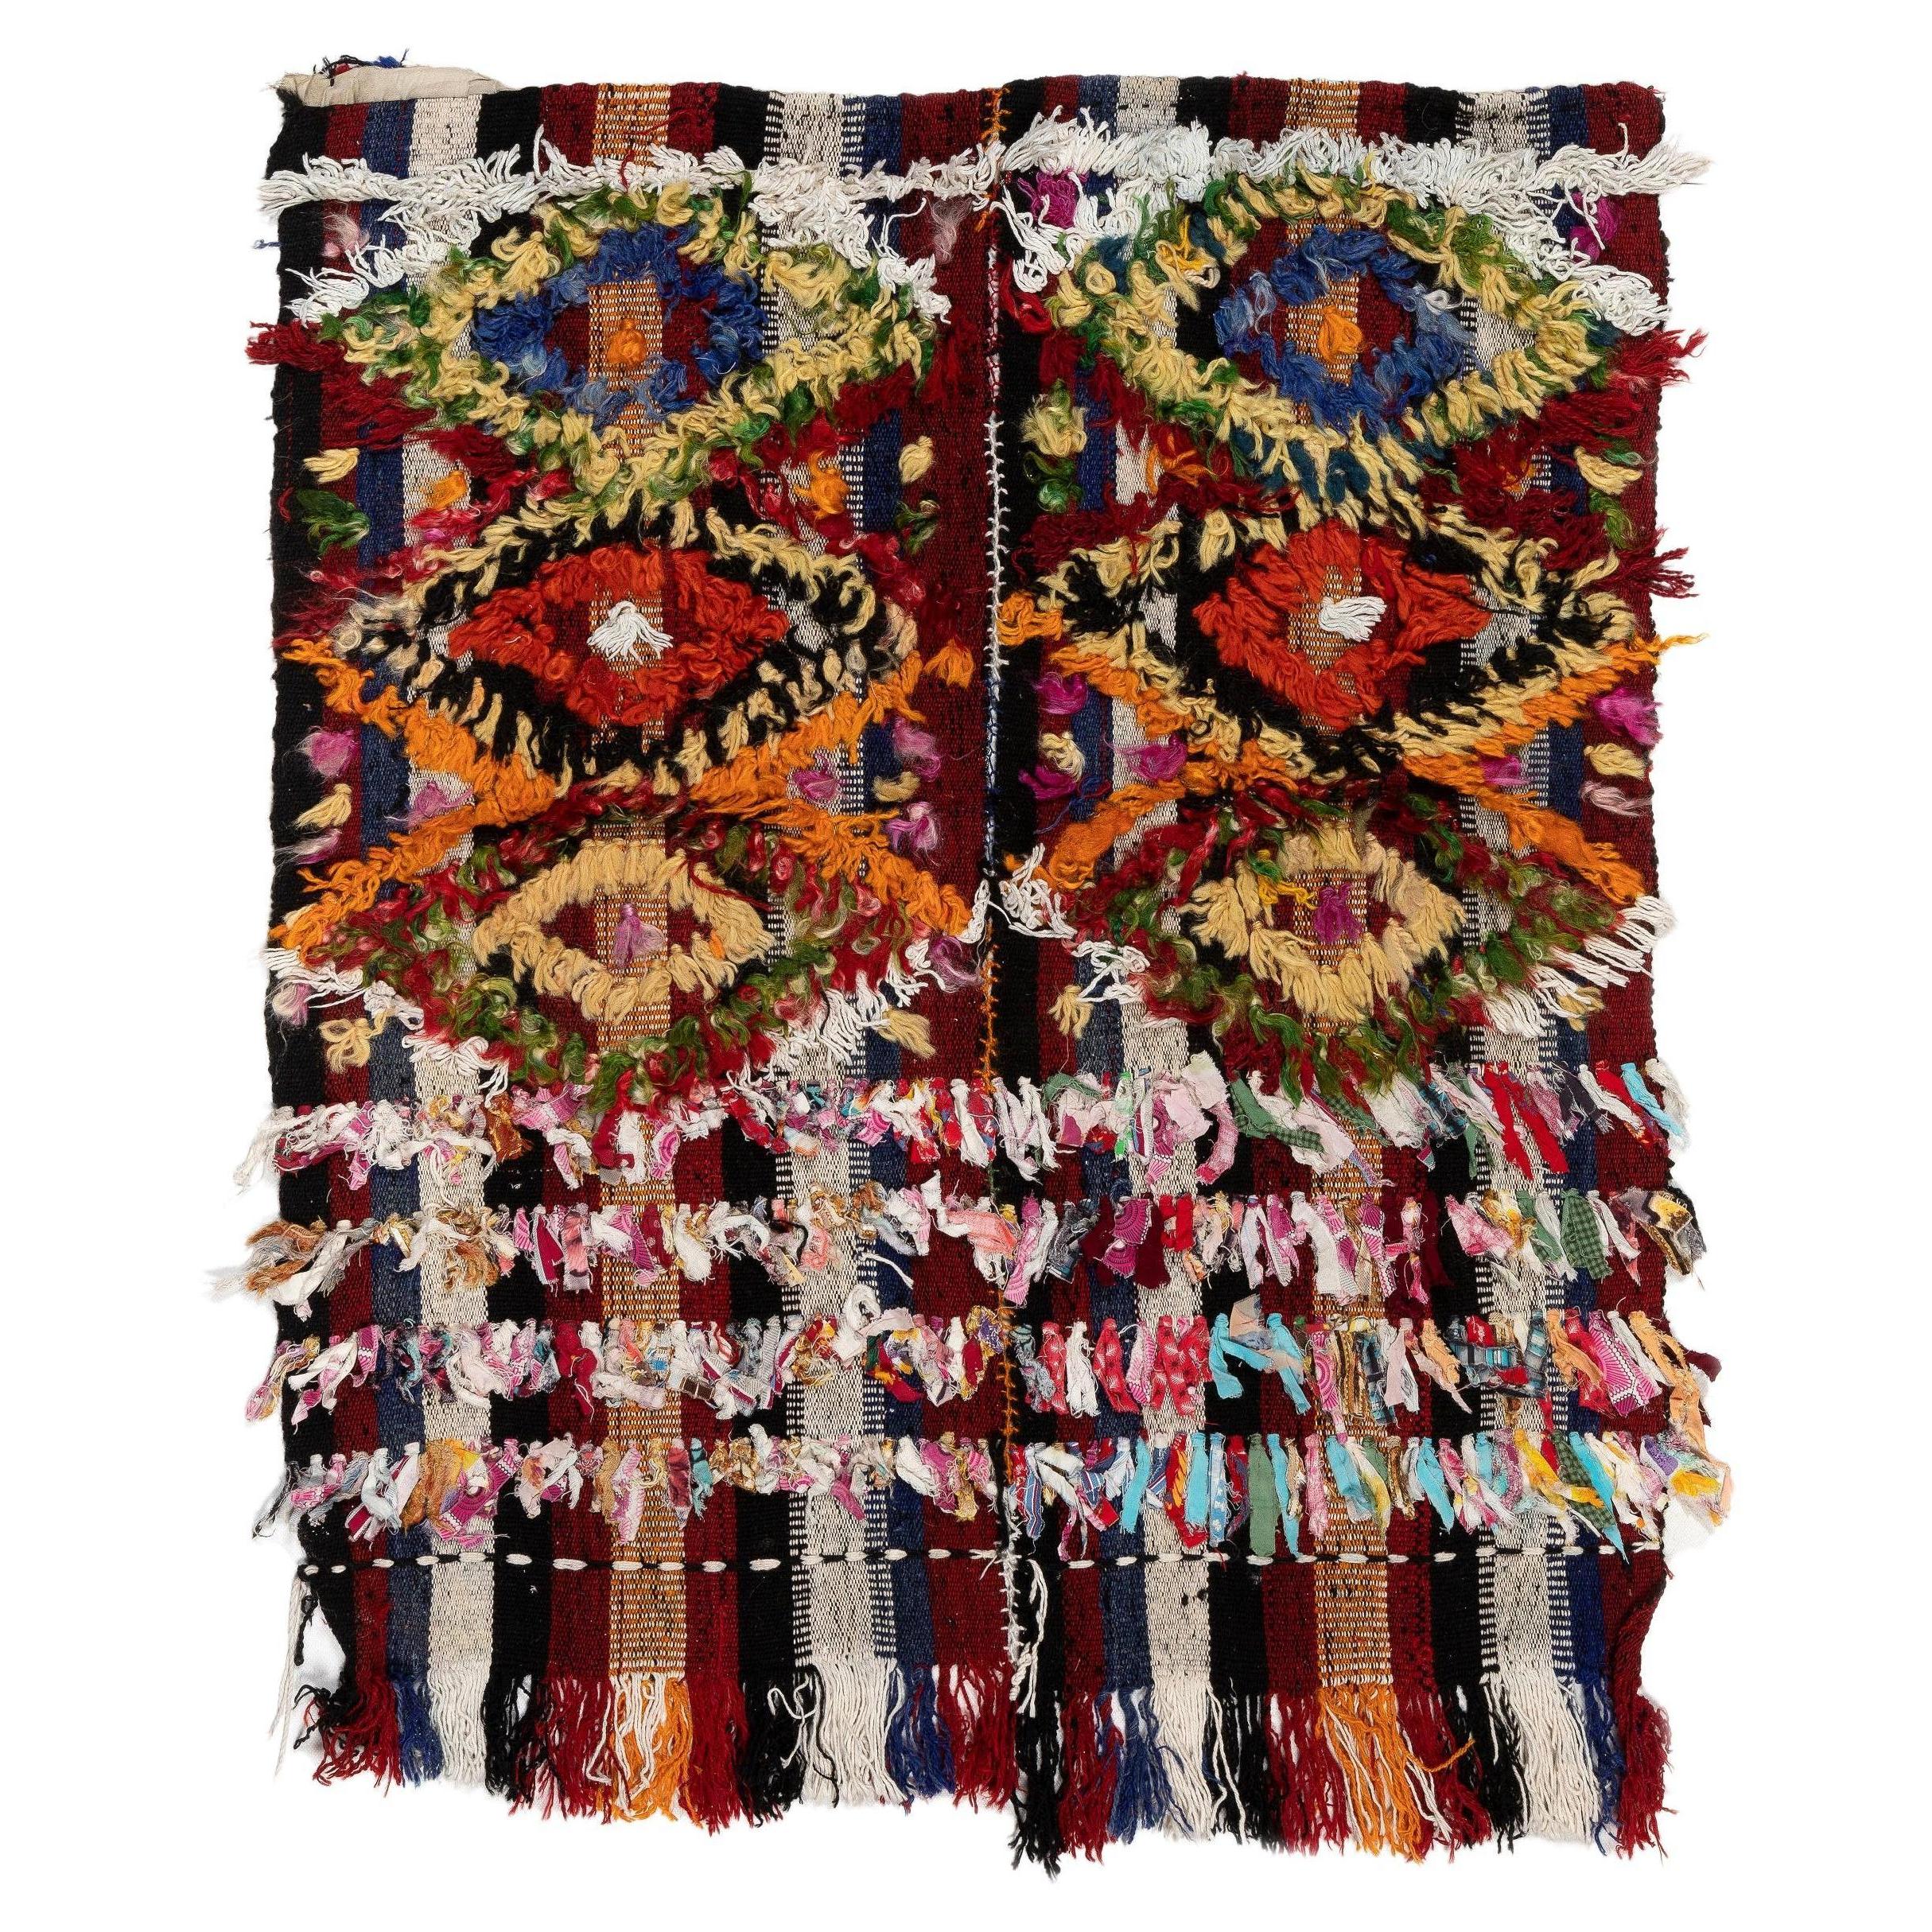 3x3.4 ft Hand-Woven Vintage Anatolian Wall Hanging Kilim with Colorful Poms For Sale